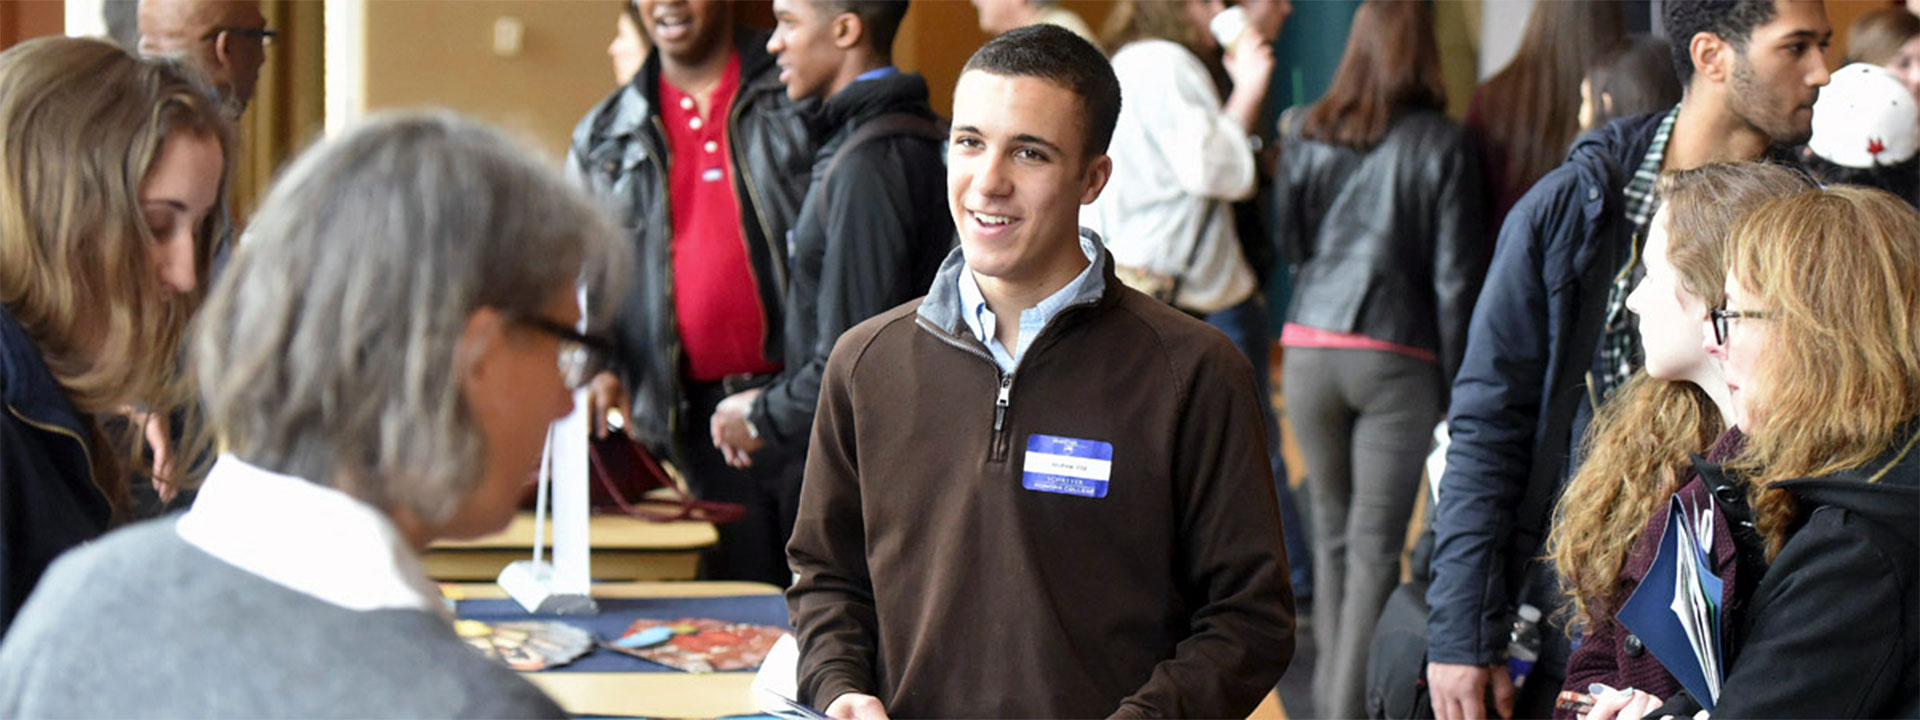 Prospective student visiting tables during Scholars Day